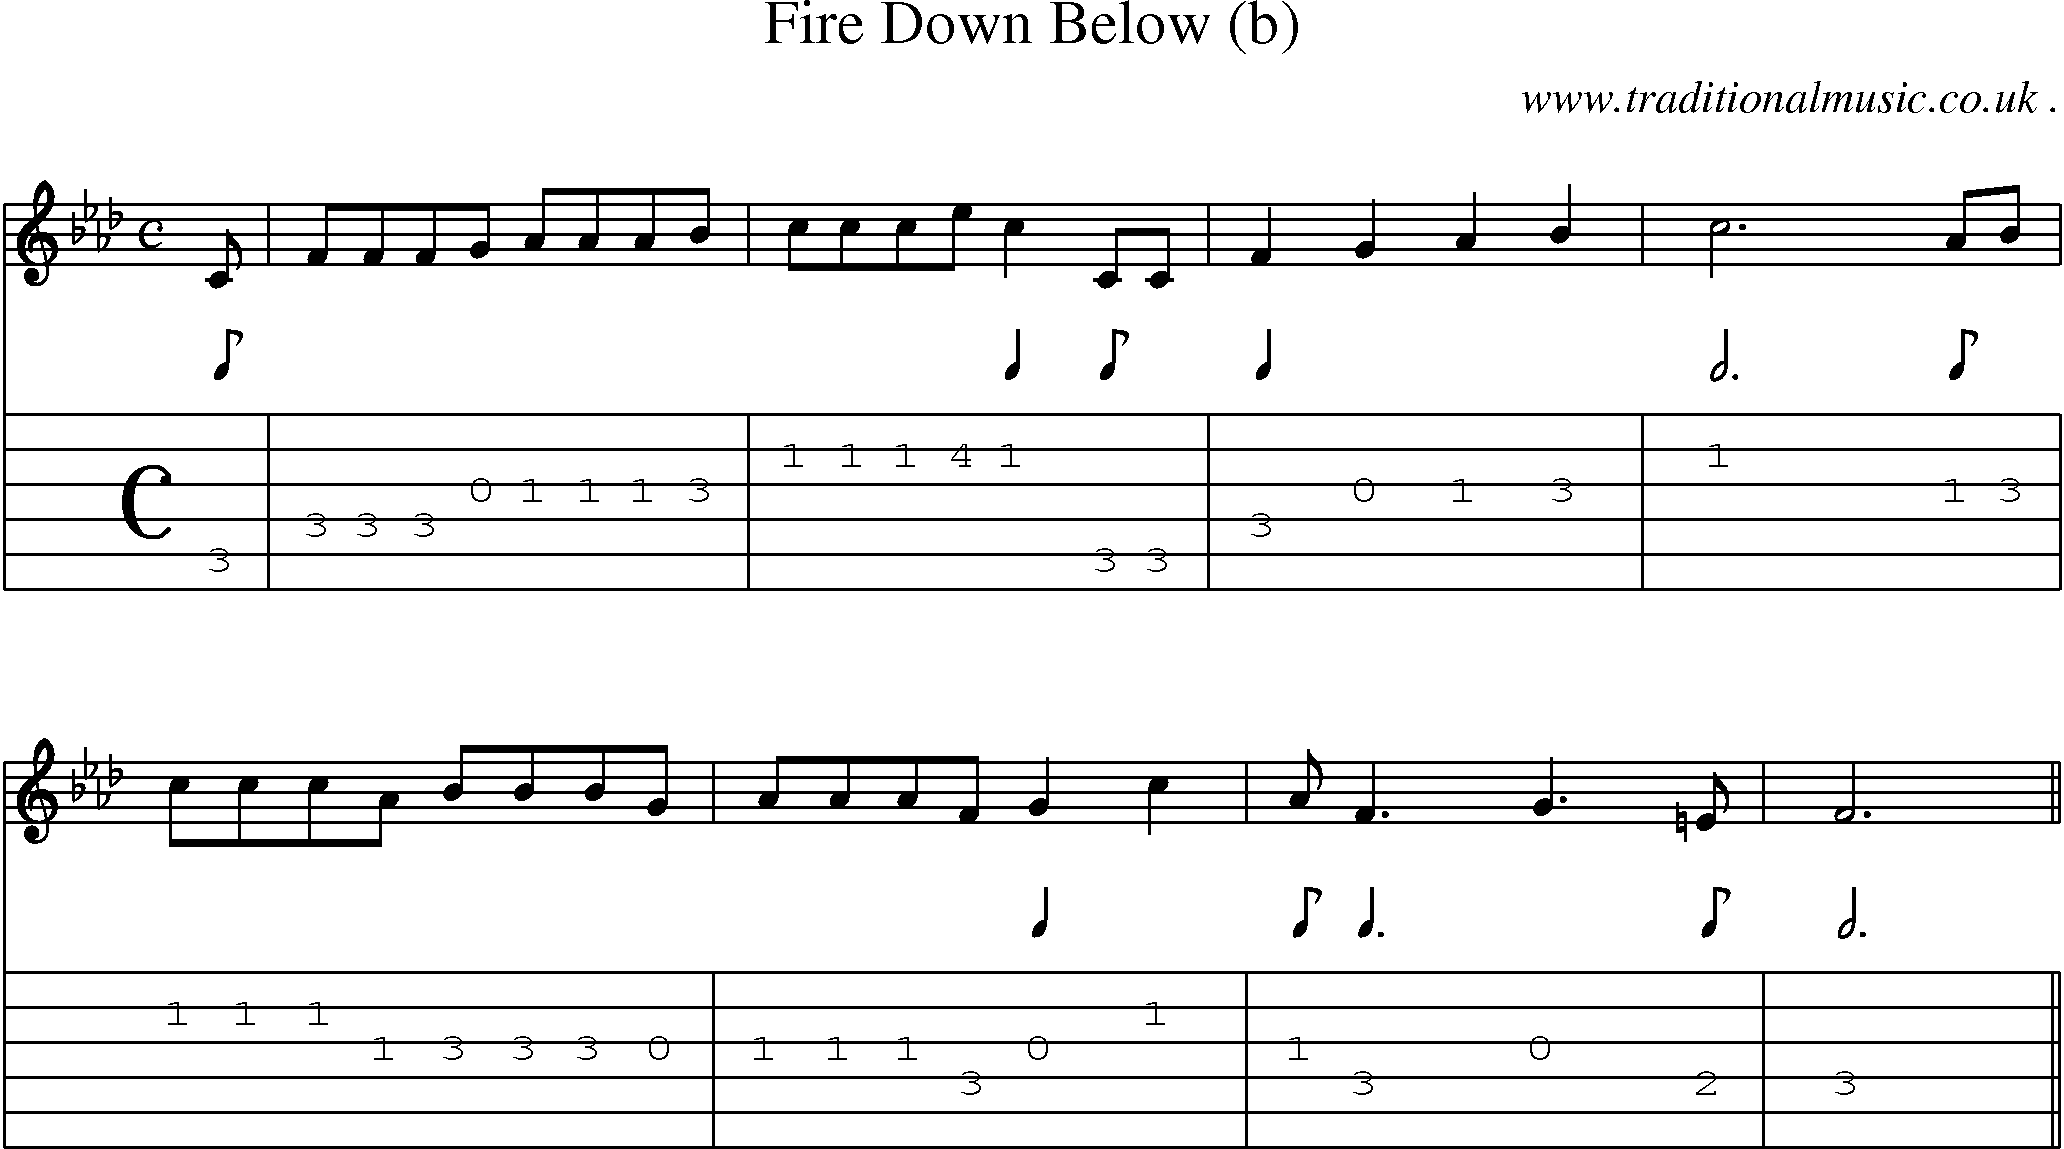 Sheet-Music and Guitar Tabs for Fire Down Below (b)